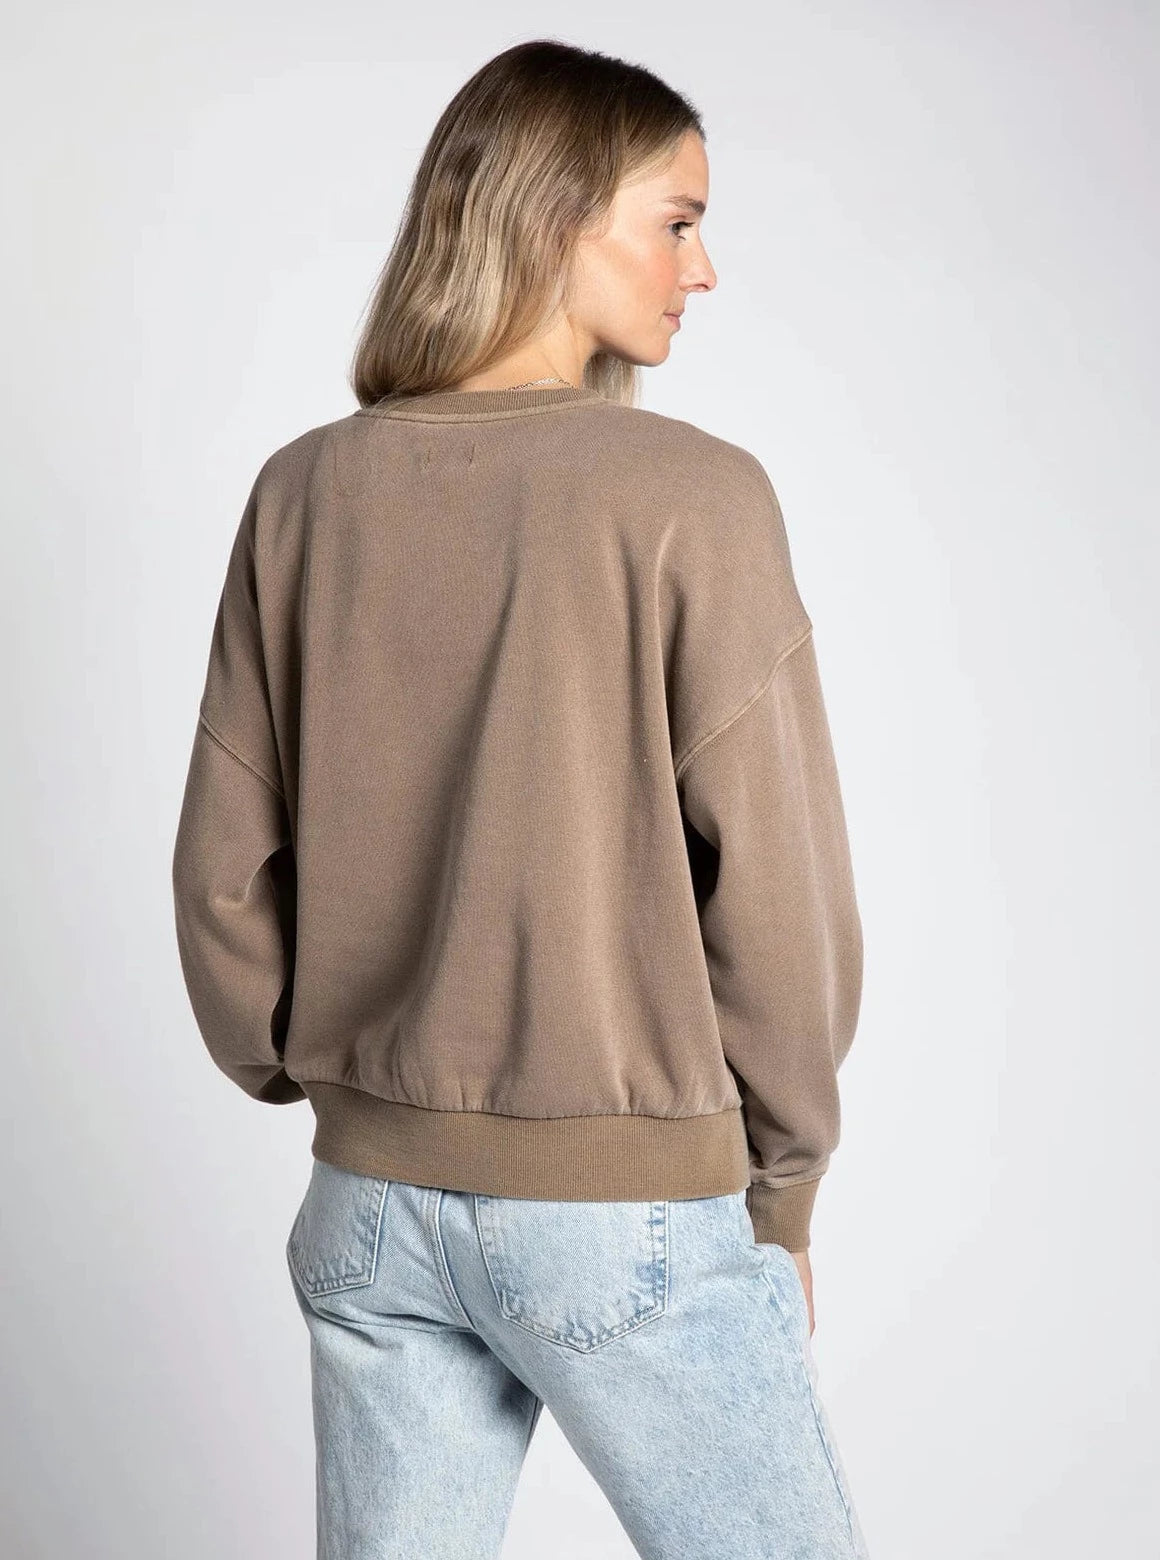 Game Day Top [Taupe-T3068]